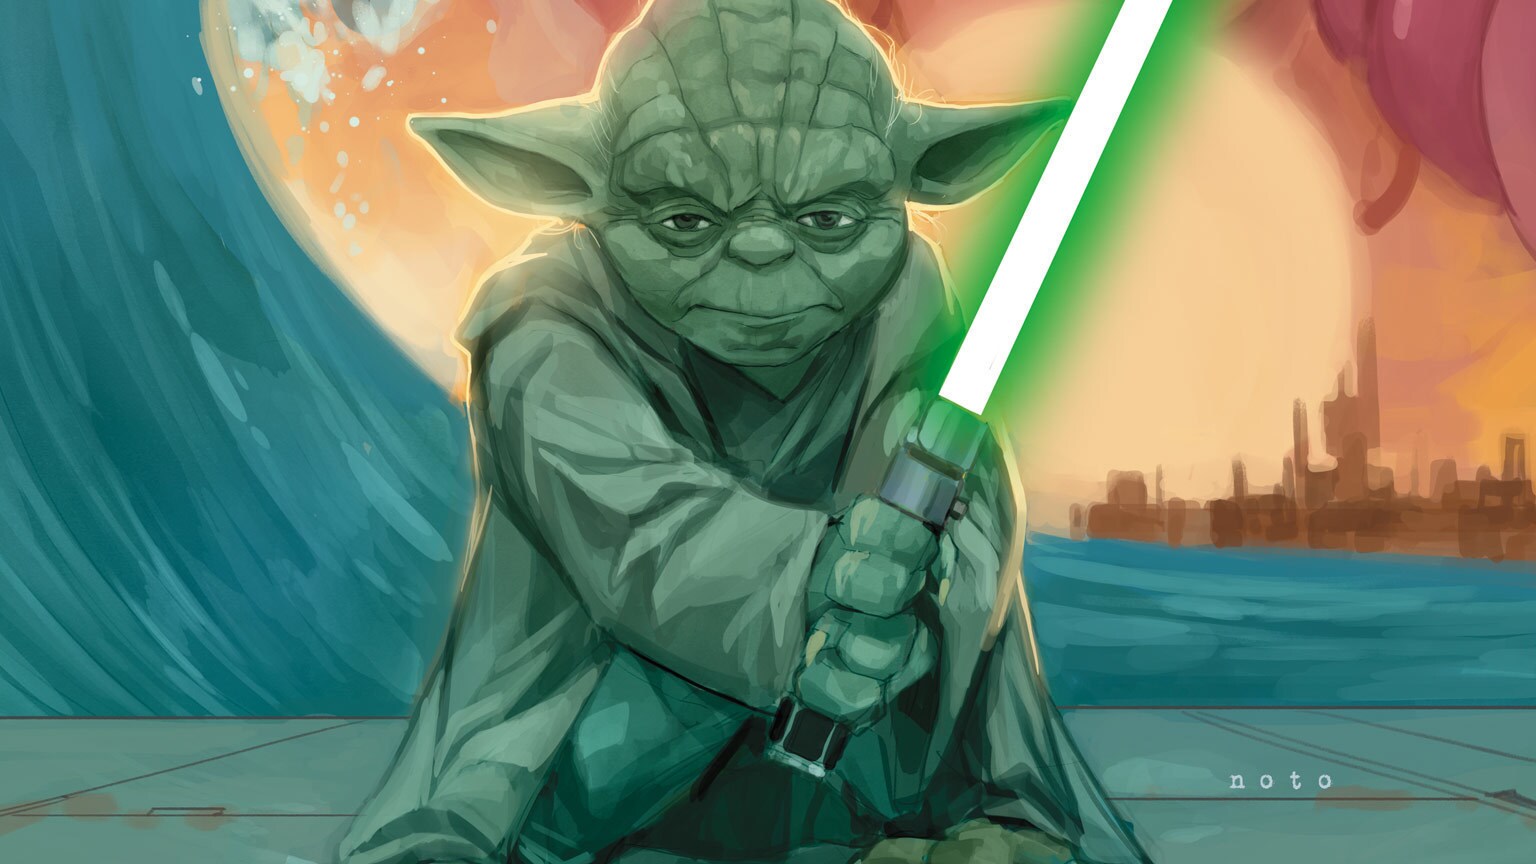 Yoda Returns to Turrak in Marvel’s Star Wars: Yoda #2 - Exclusive Preview